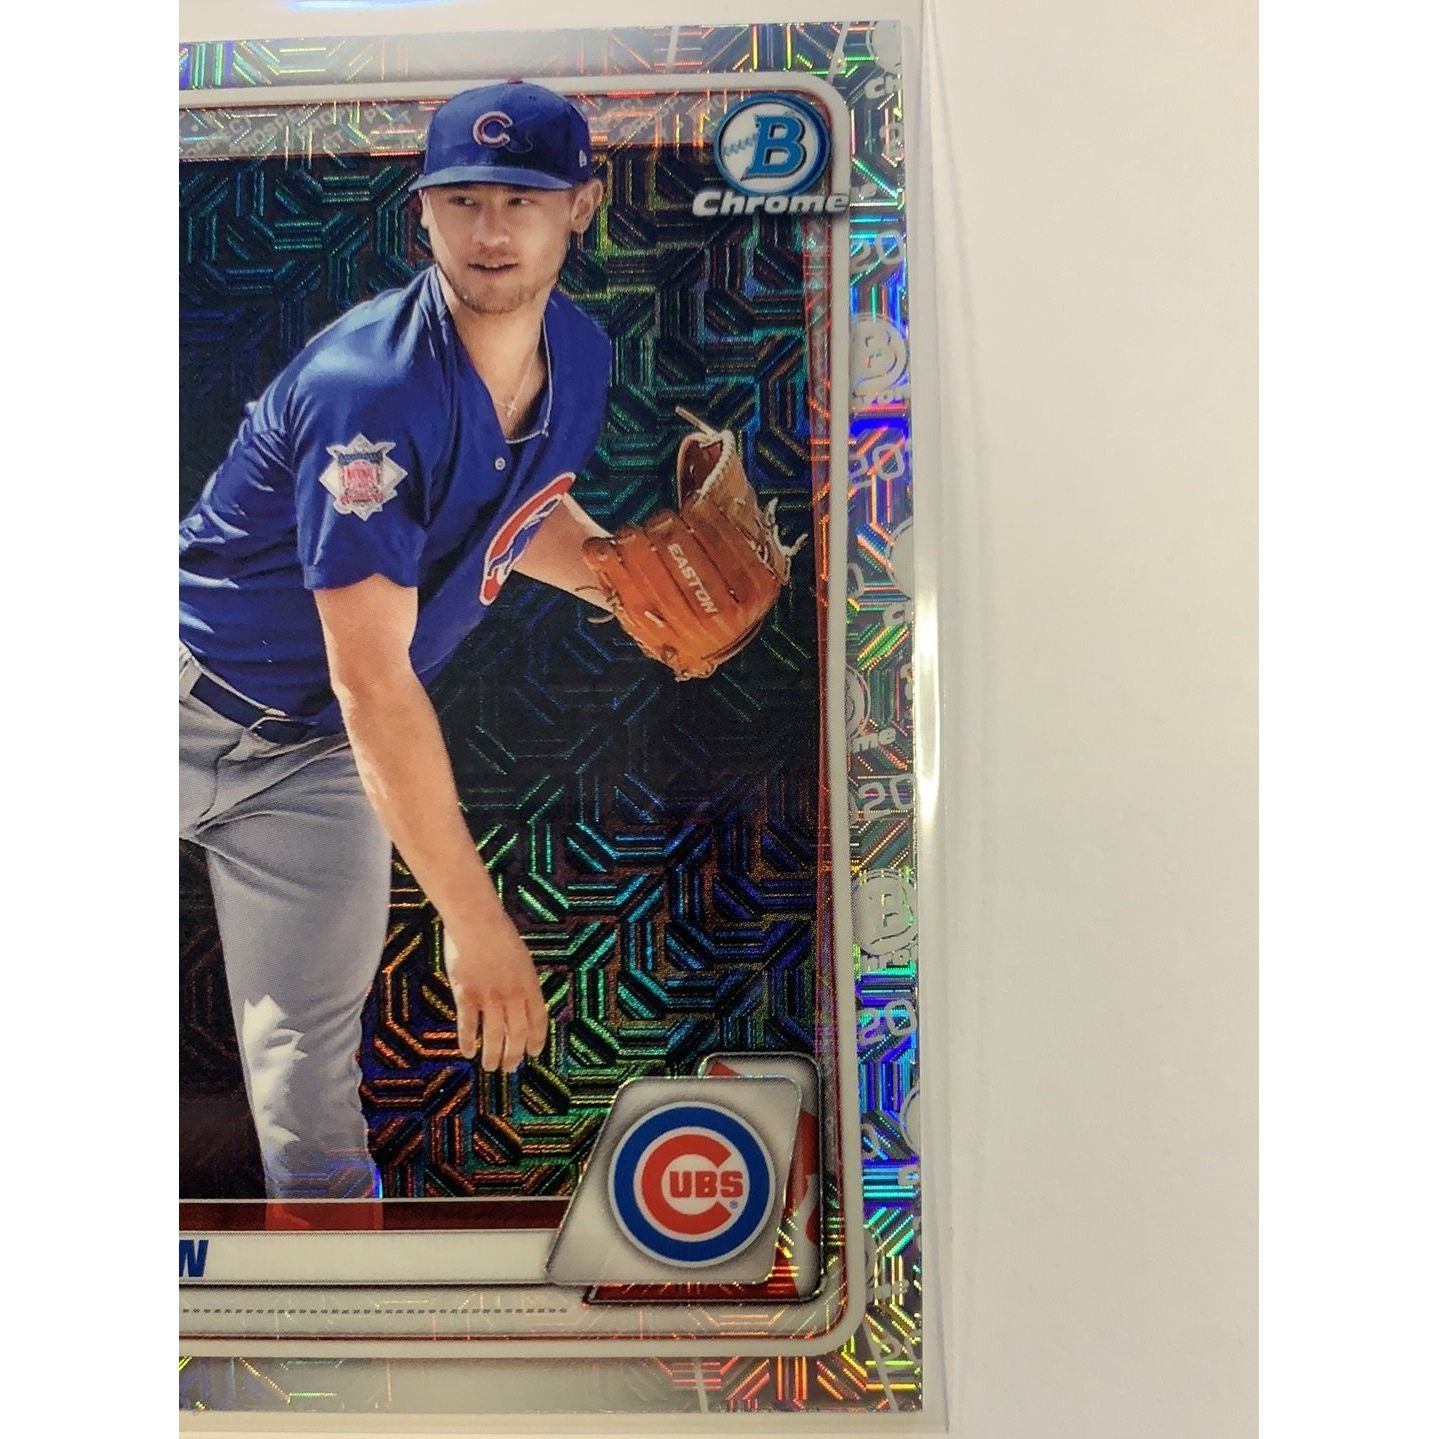  2020 Bowman Chrome Ryan Jensen Mojo Refractor  Local Legends Cards & Collectibles